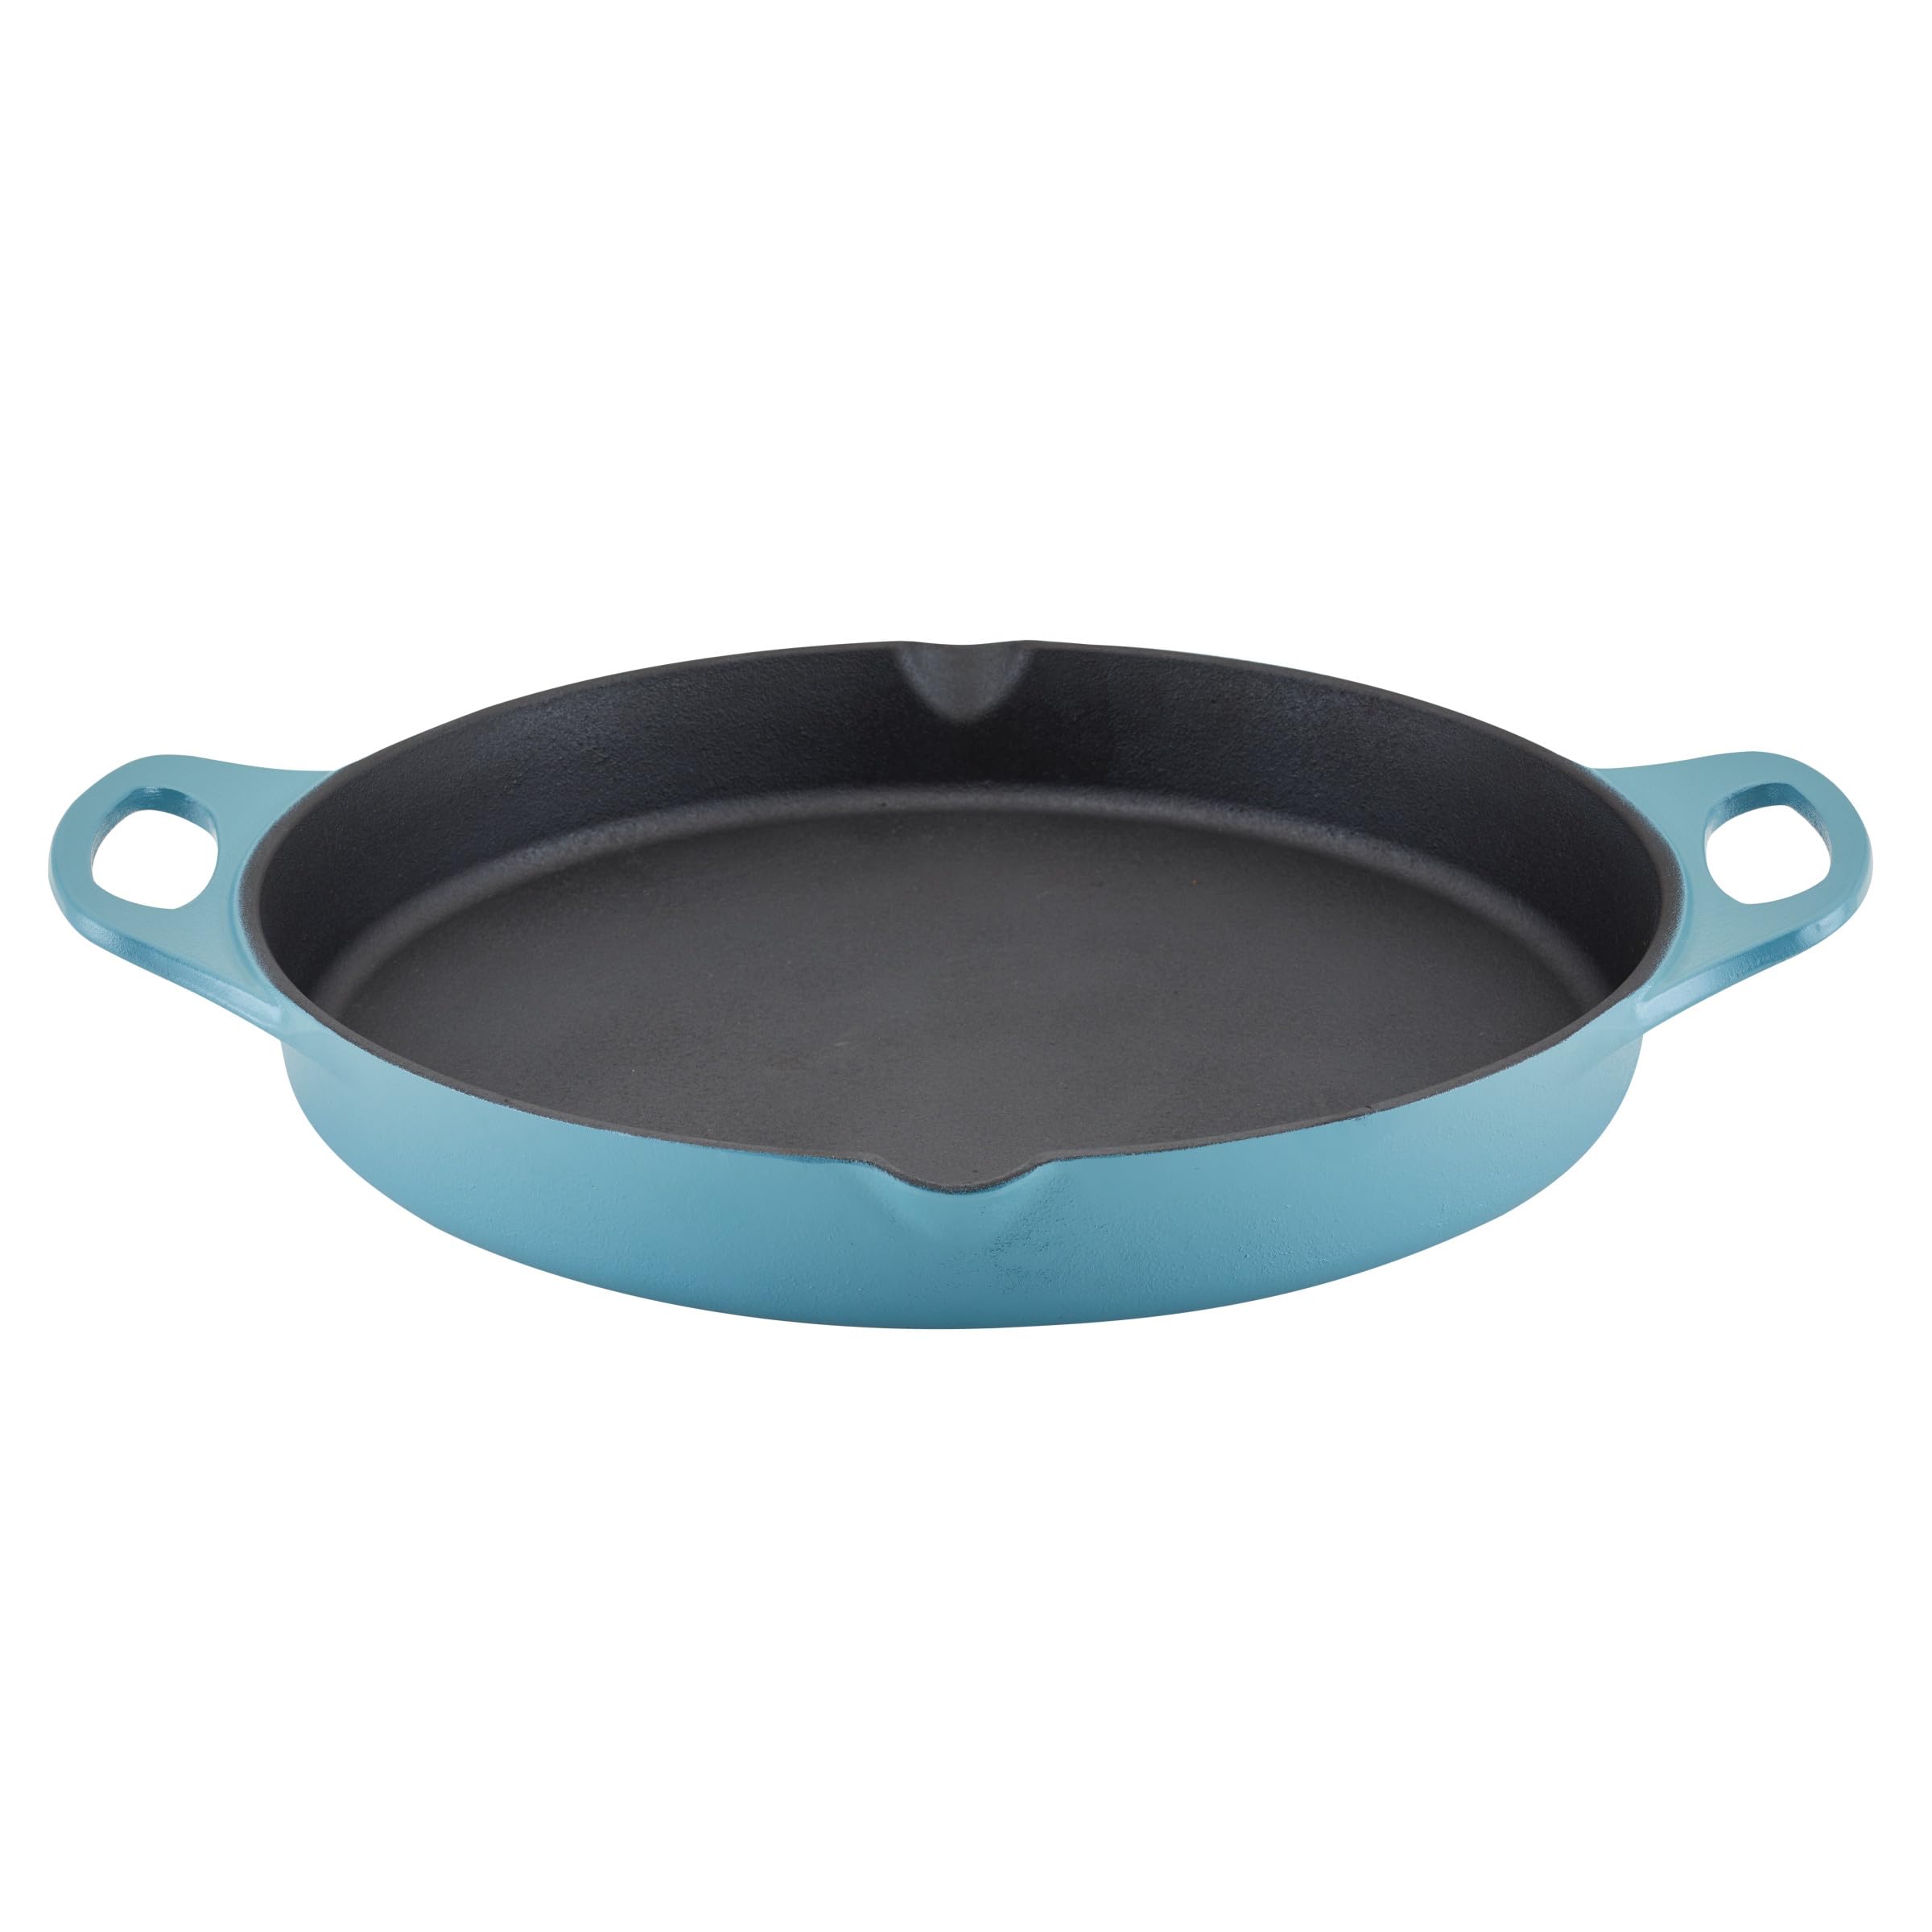 Rachael Ray Nitro Cast Iron Skillet with Side Handles, 14 inch, Agave Blue